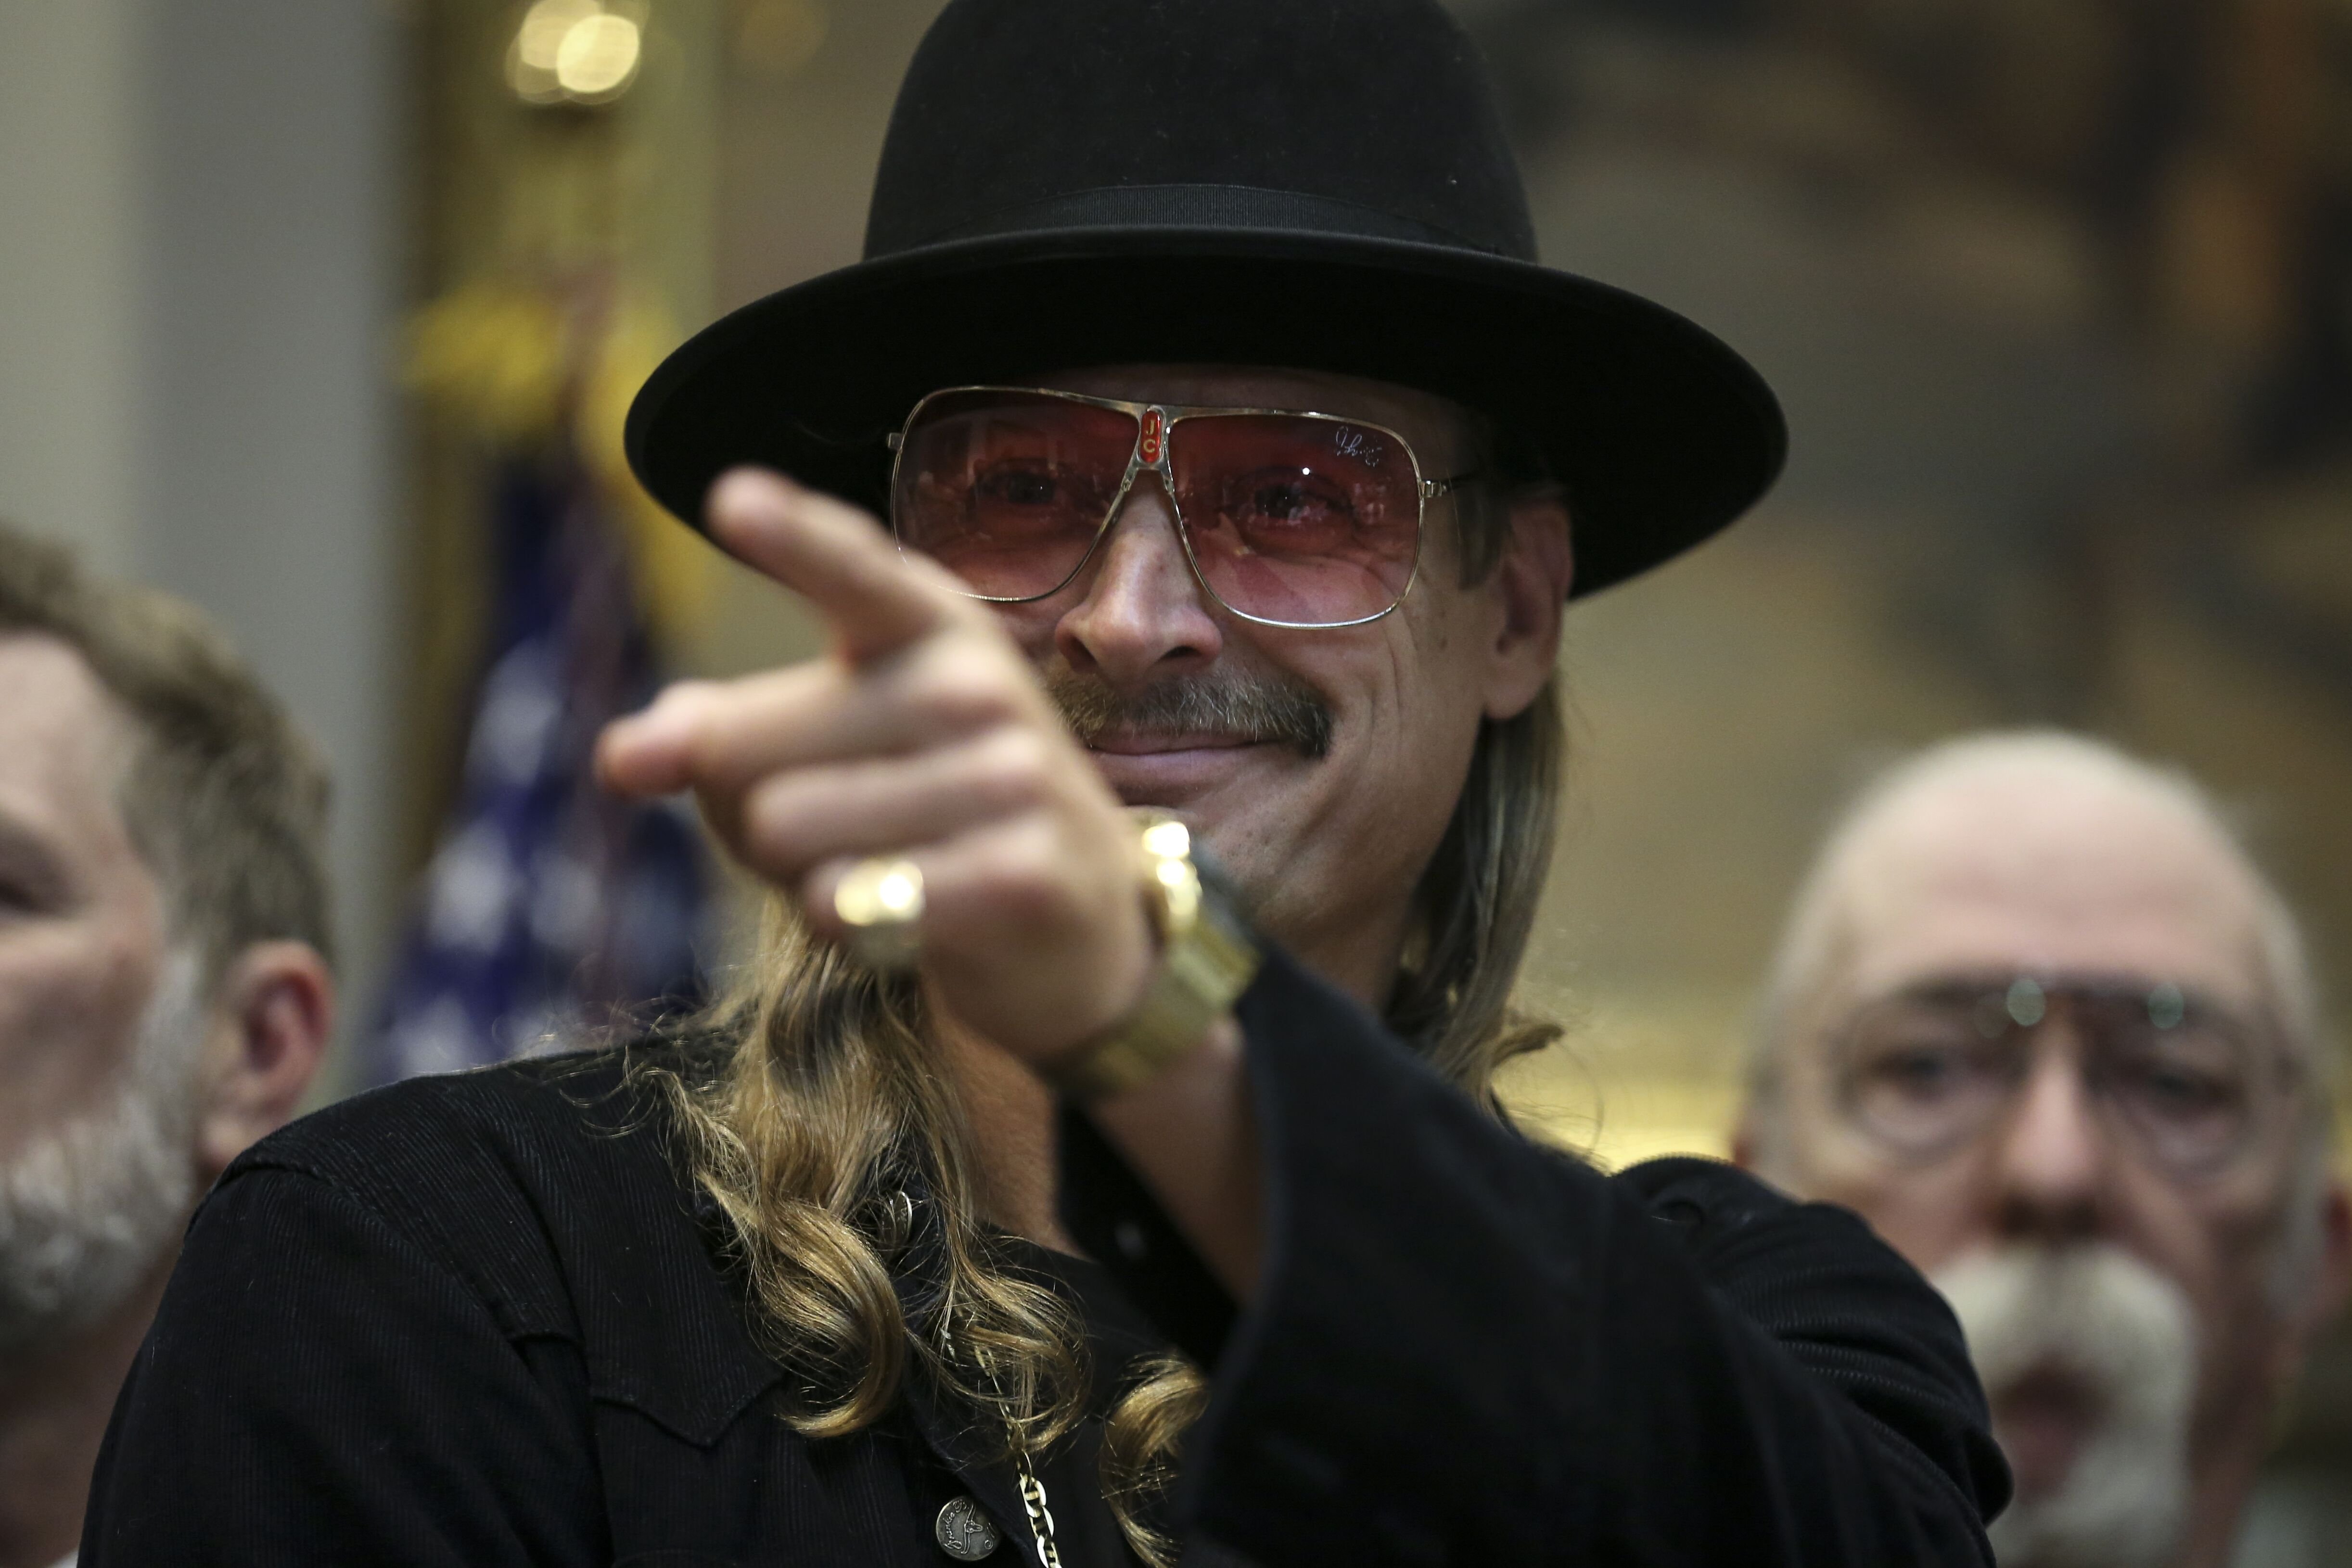 Kid Rock attends a signing ceremony as U.S. President Donald Trump signs the H.R. 1551 in Washington 2018 | Source: Getty Images